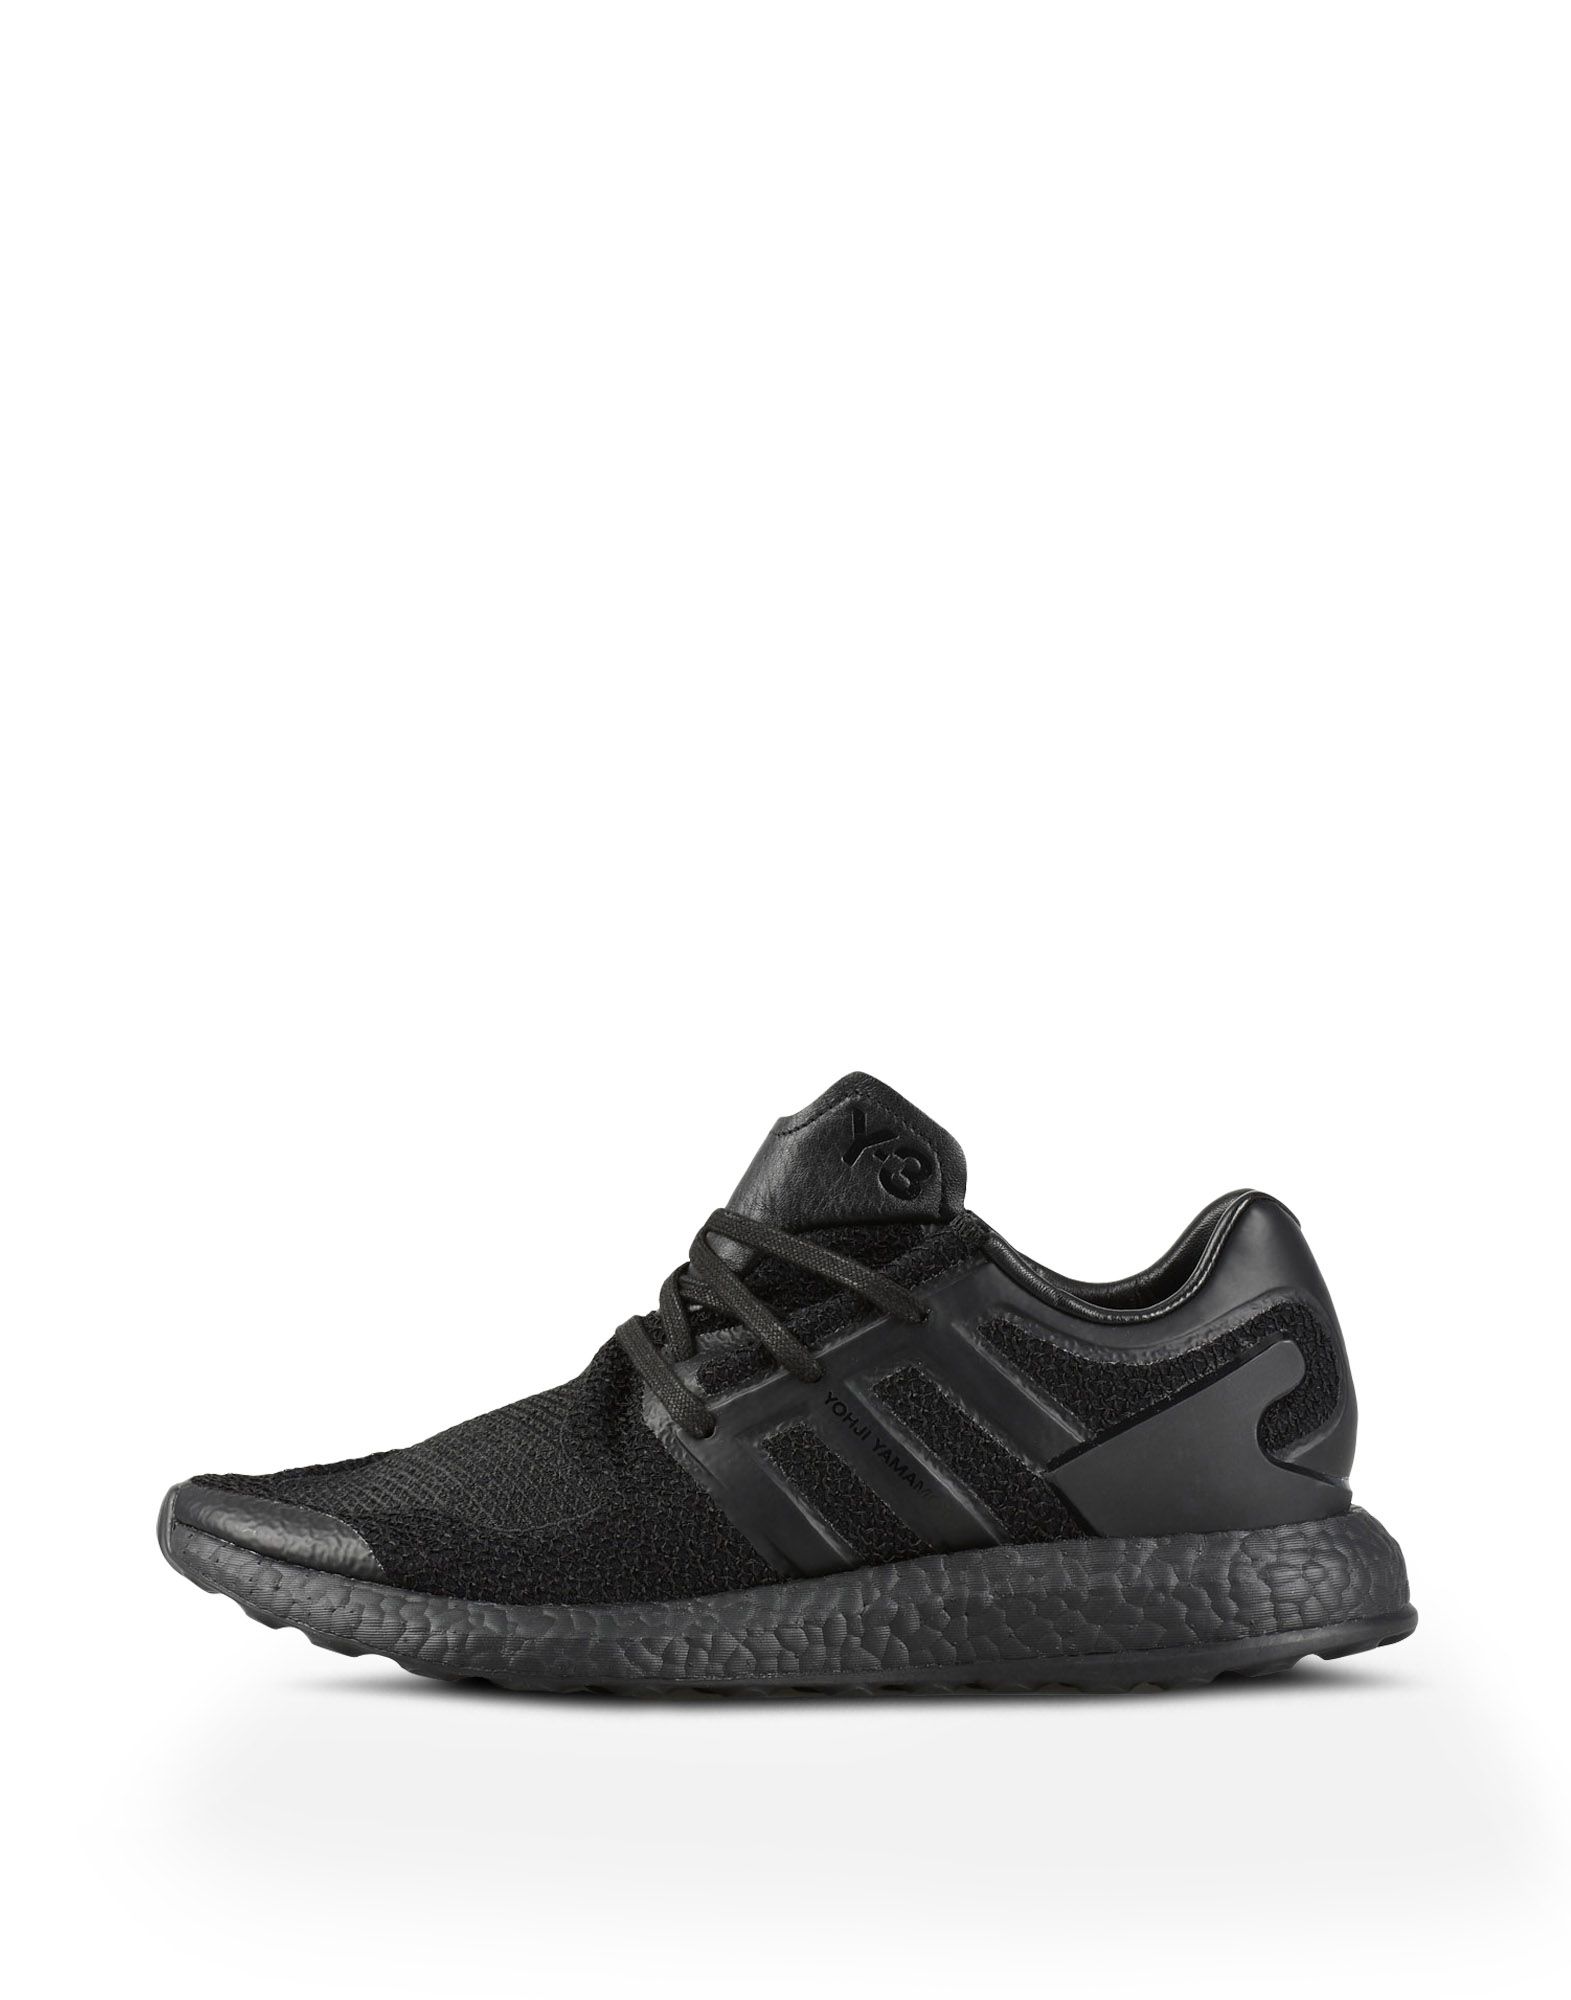 adidas y3 boost womens for sale- OFF 54 